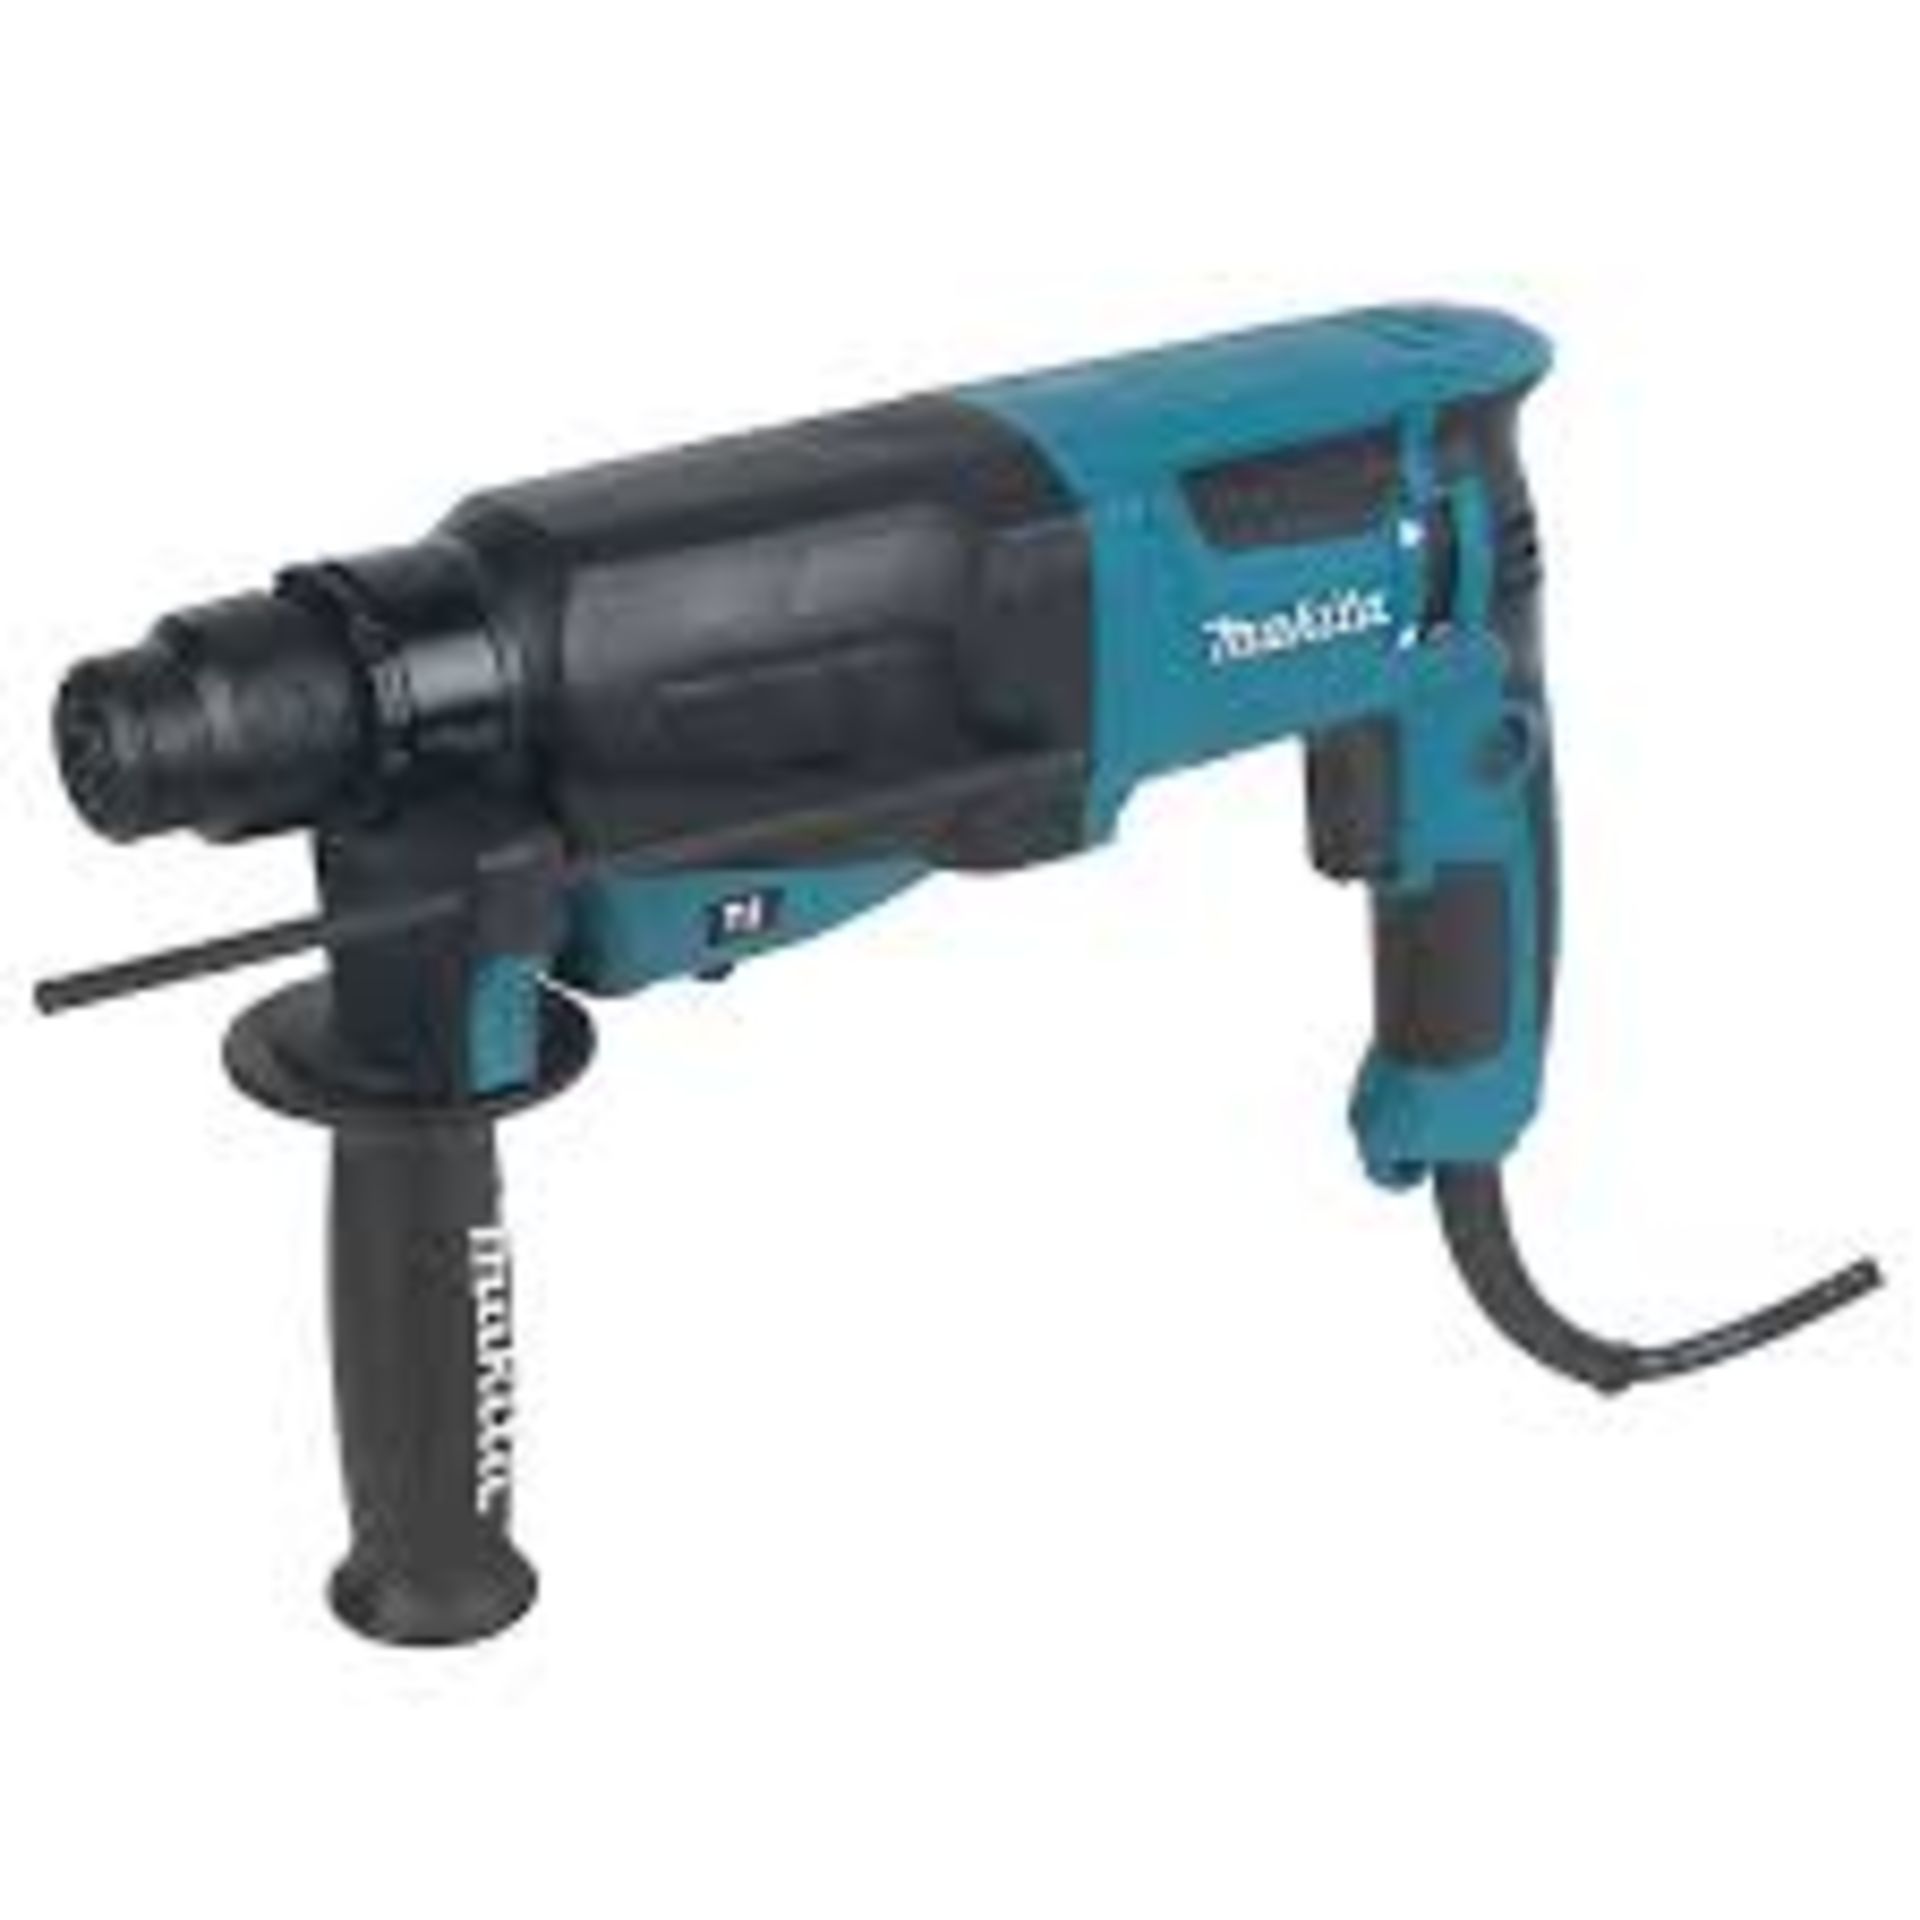 Makita 240V 800W Corded SDS+ drill HR2630. - S2. The Makita HR2630 is a 3 function 2kg SDS plus